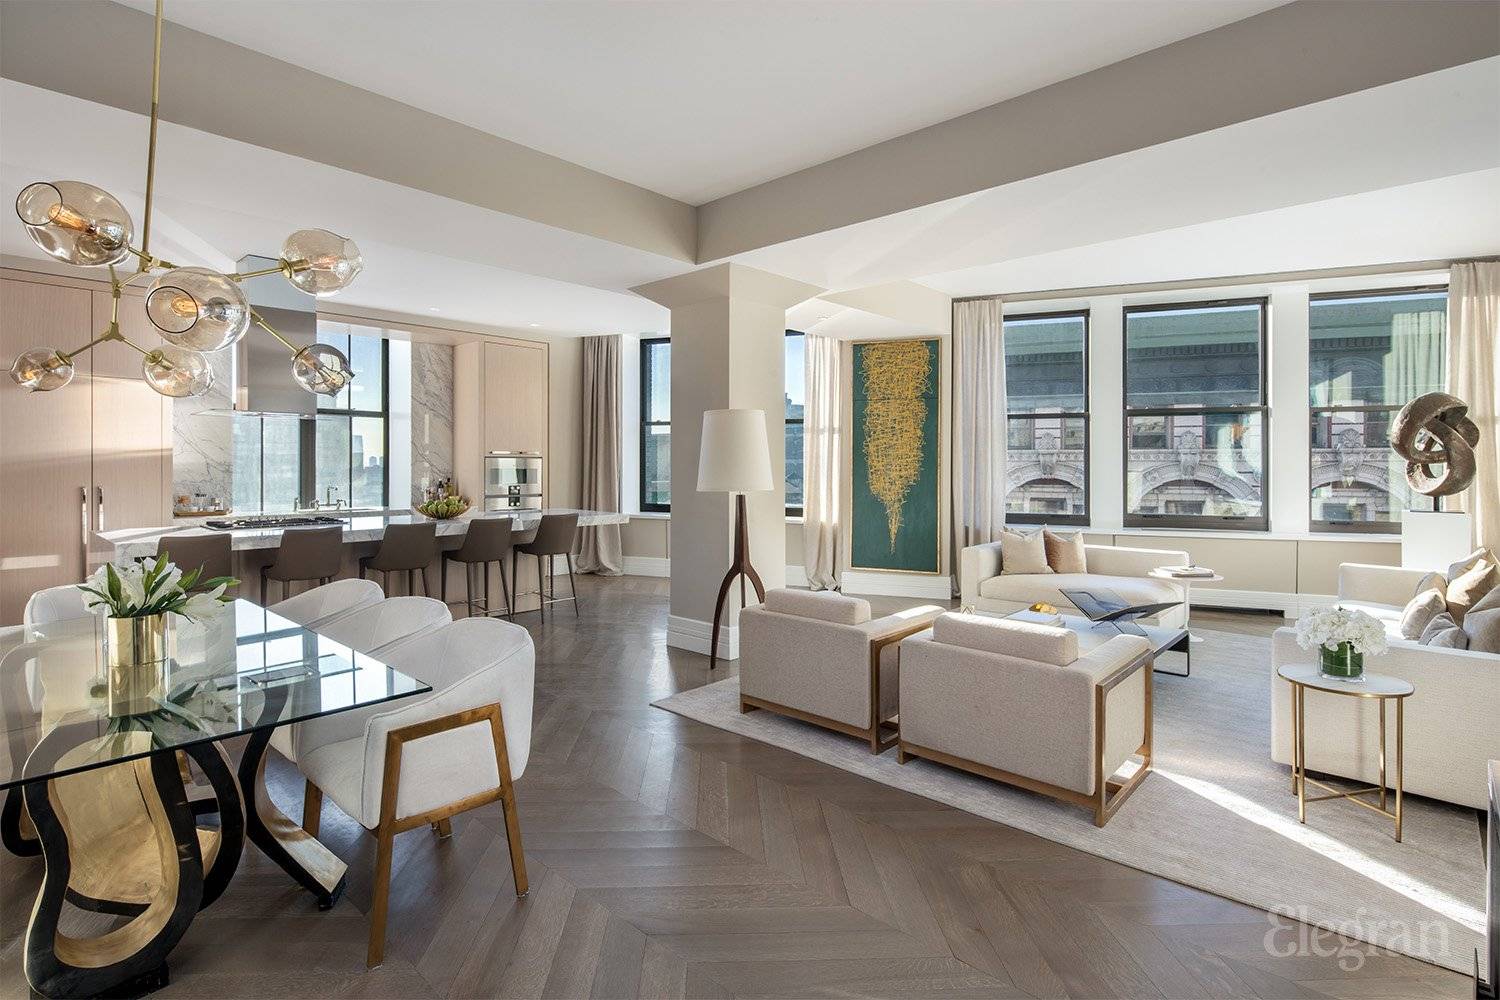 We invite you to live an unprecedented level of luxury in one of the most successful new developments in the city s history, now home to the pinnacle of the ...